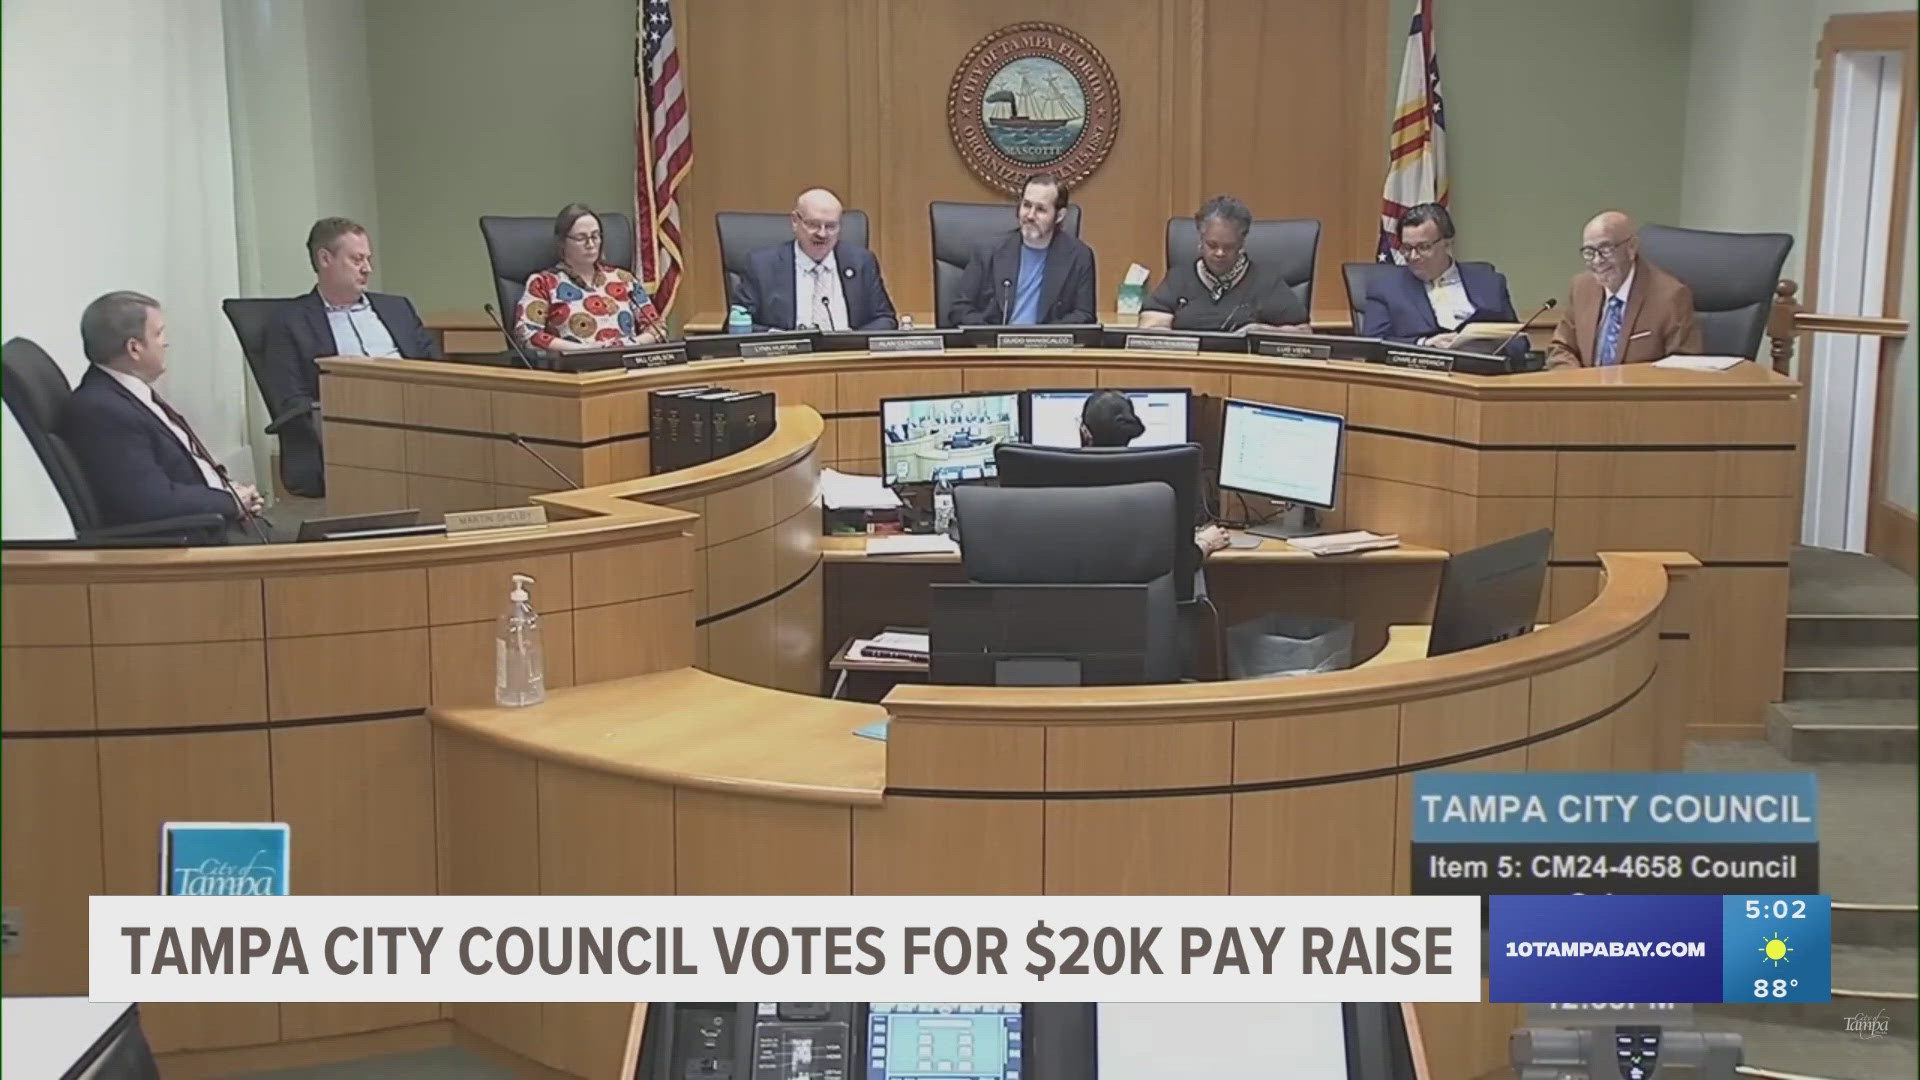 Tampa City Council salaries sit at $53,022, below the average median income for the city. Councilmembers will meet next year to determine future salaries.